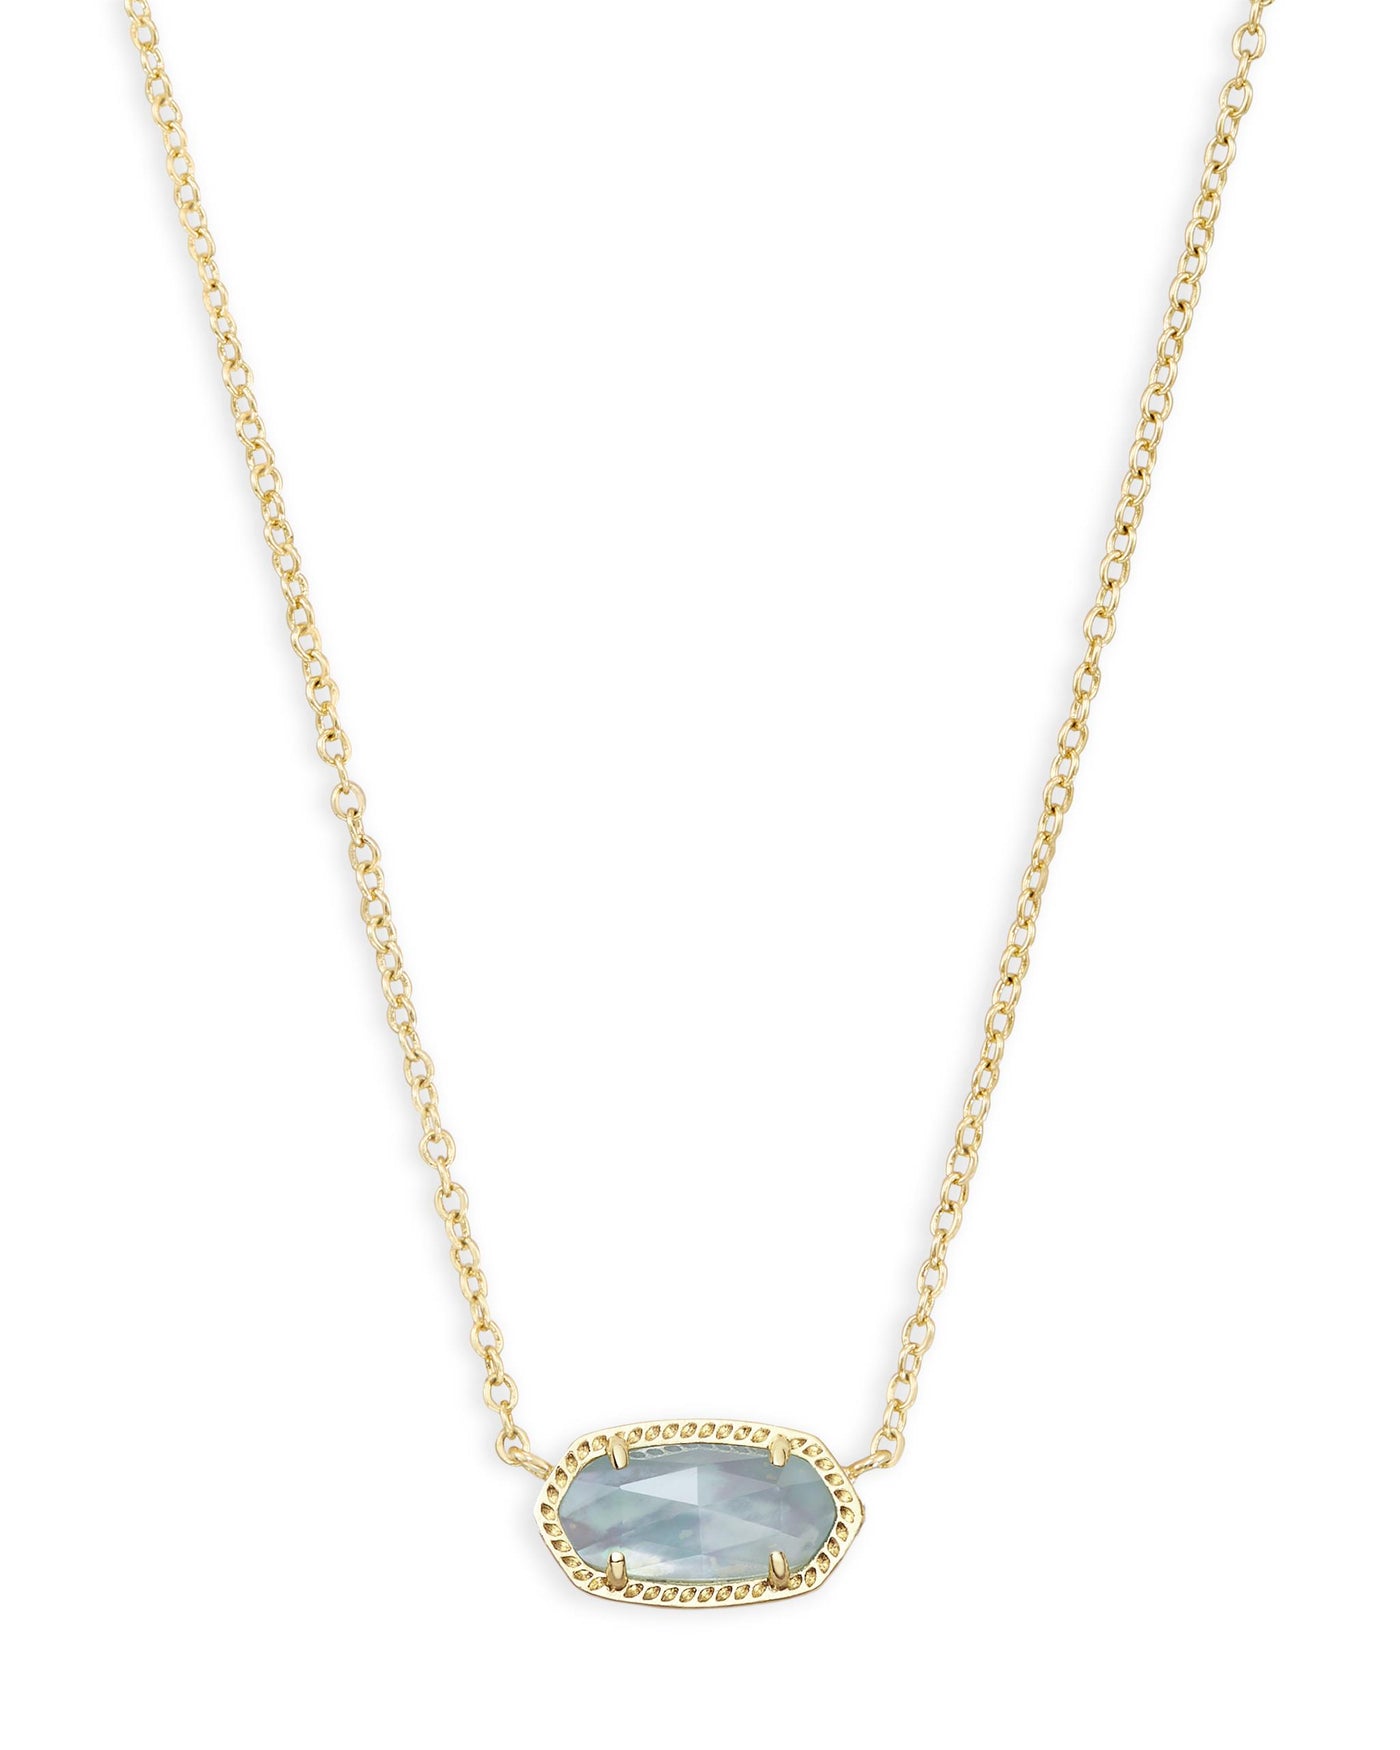 Gold Tone Necklace Featuring Light Blue Illusion by Kendra Scott